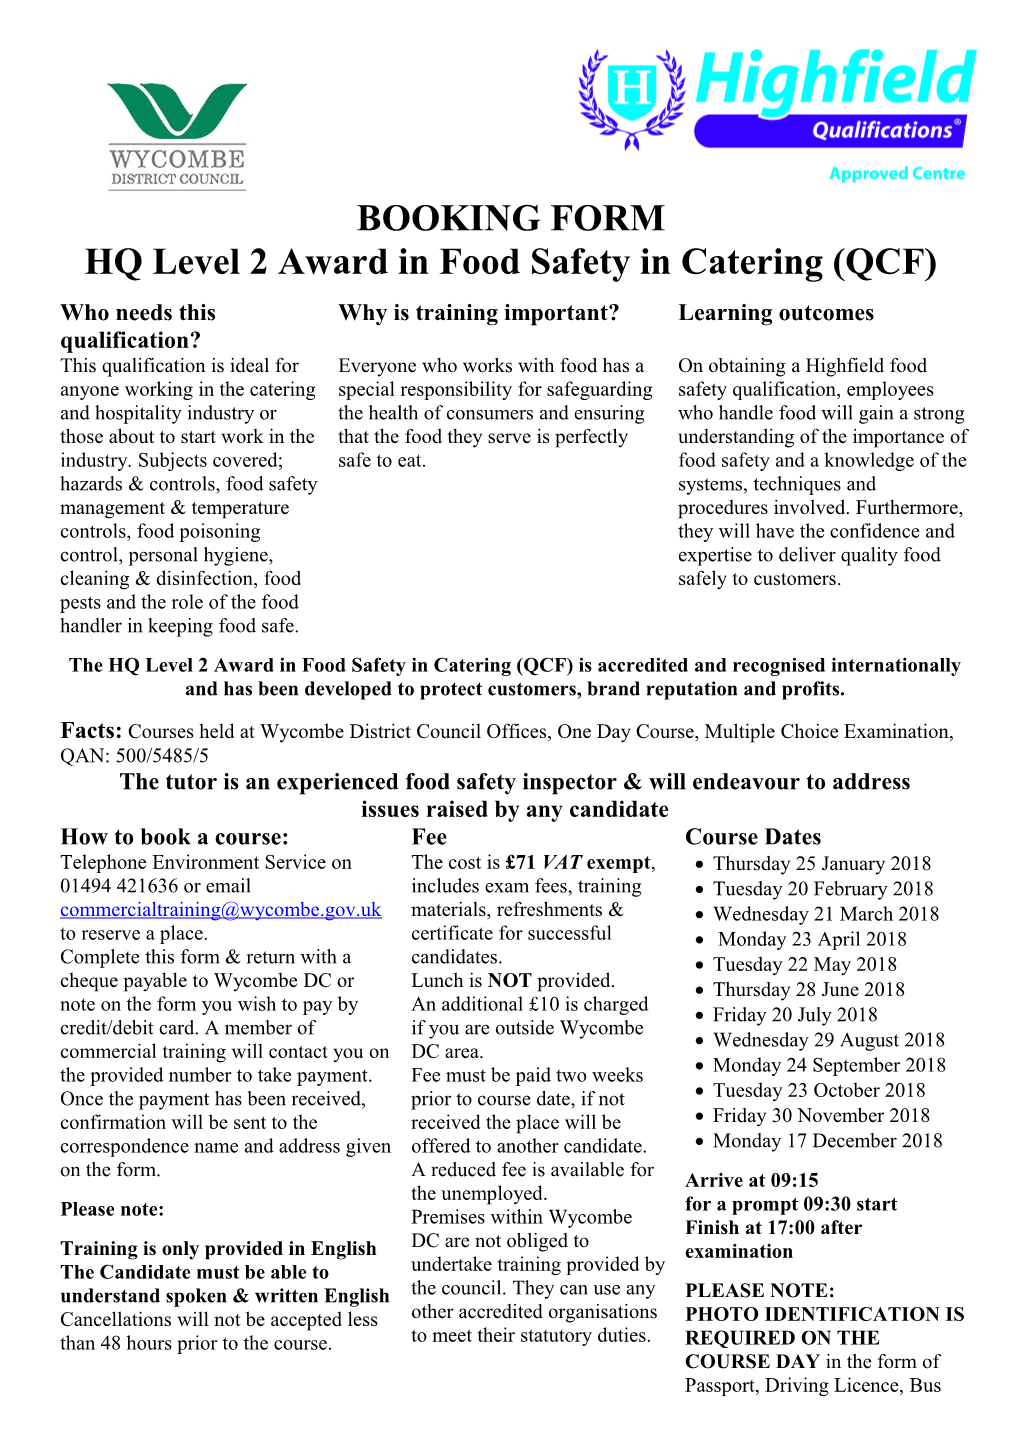 HQ Level 2 Award in Food Safety in Catering (QCF)